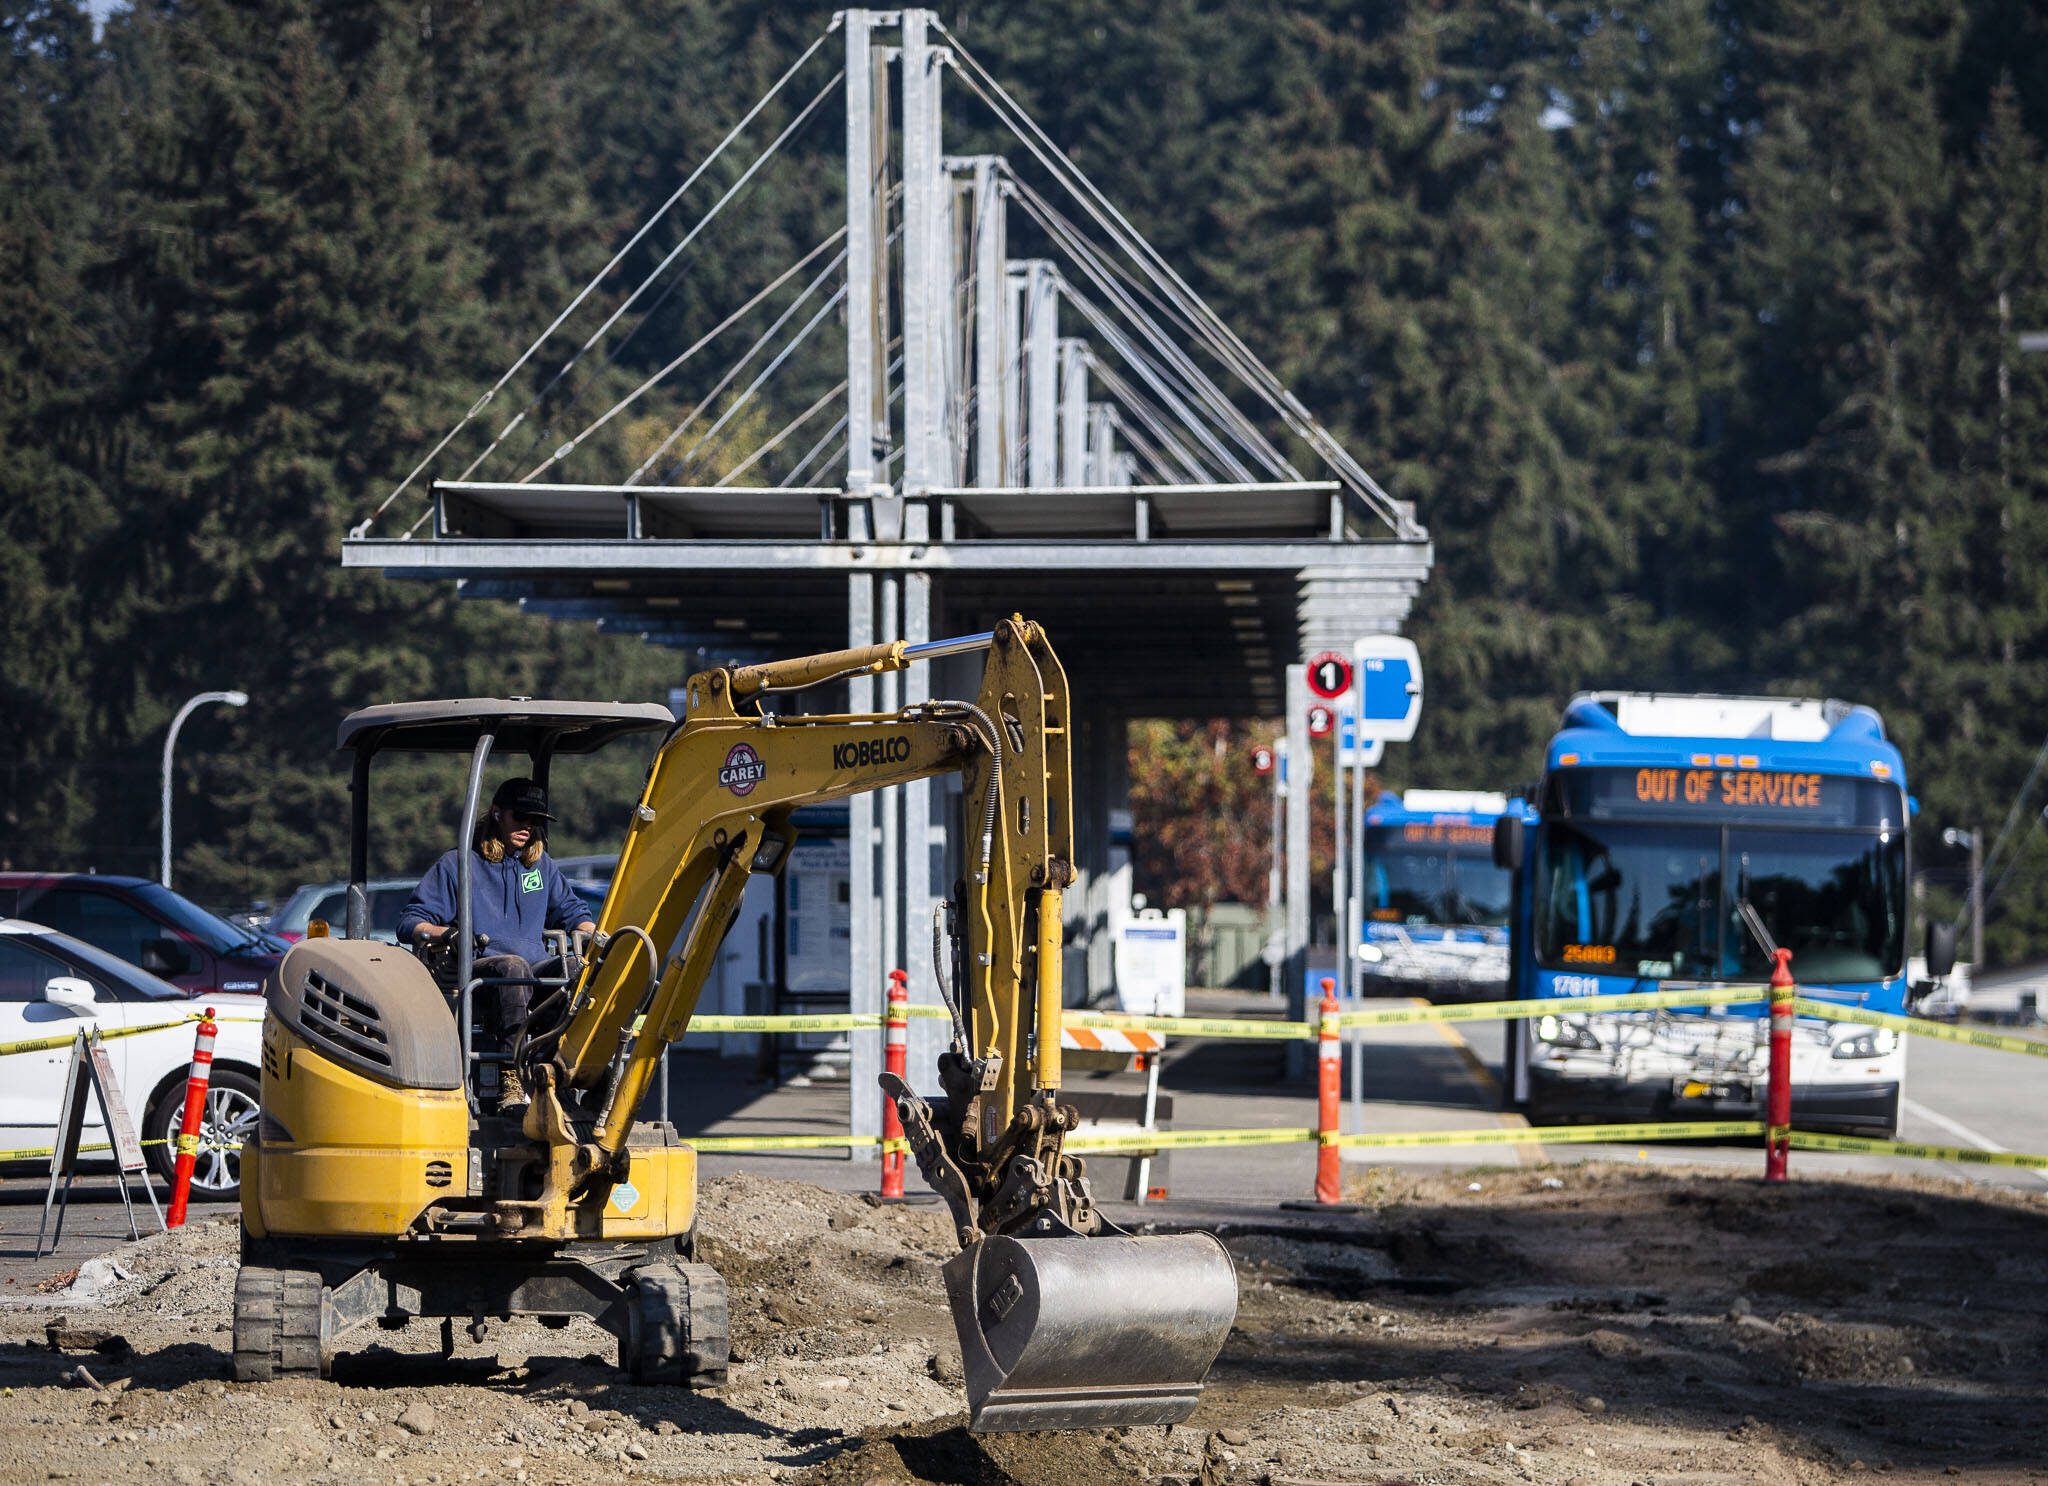 Construction continues for the Orange Line at McCollum Park and Ride on Thursday, Oct. 13, 2022 in Everett, Washington. (Olivia Vanni / The Herald)